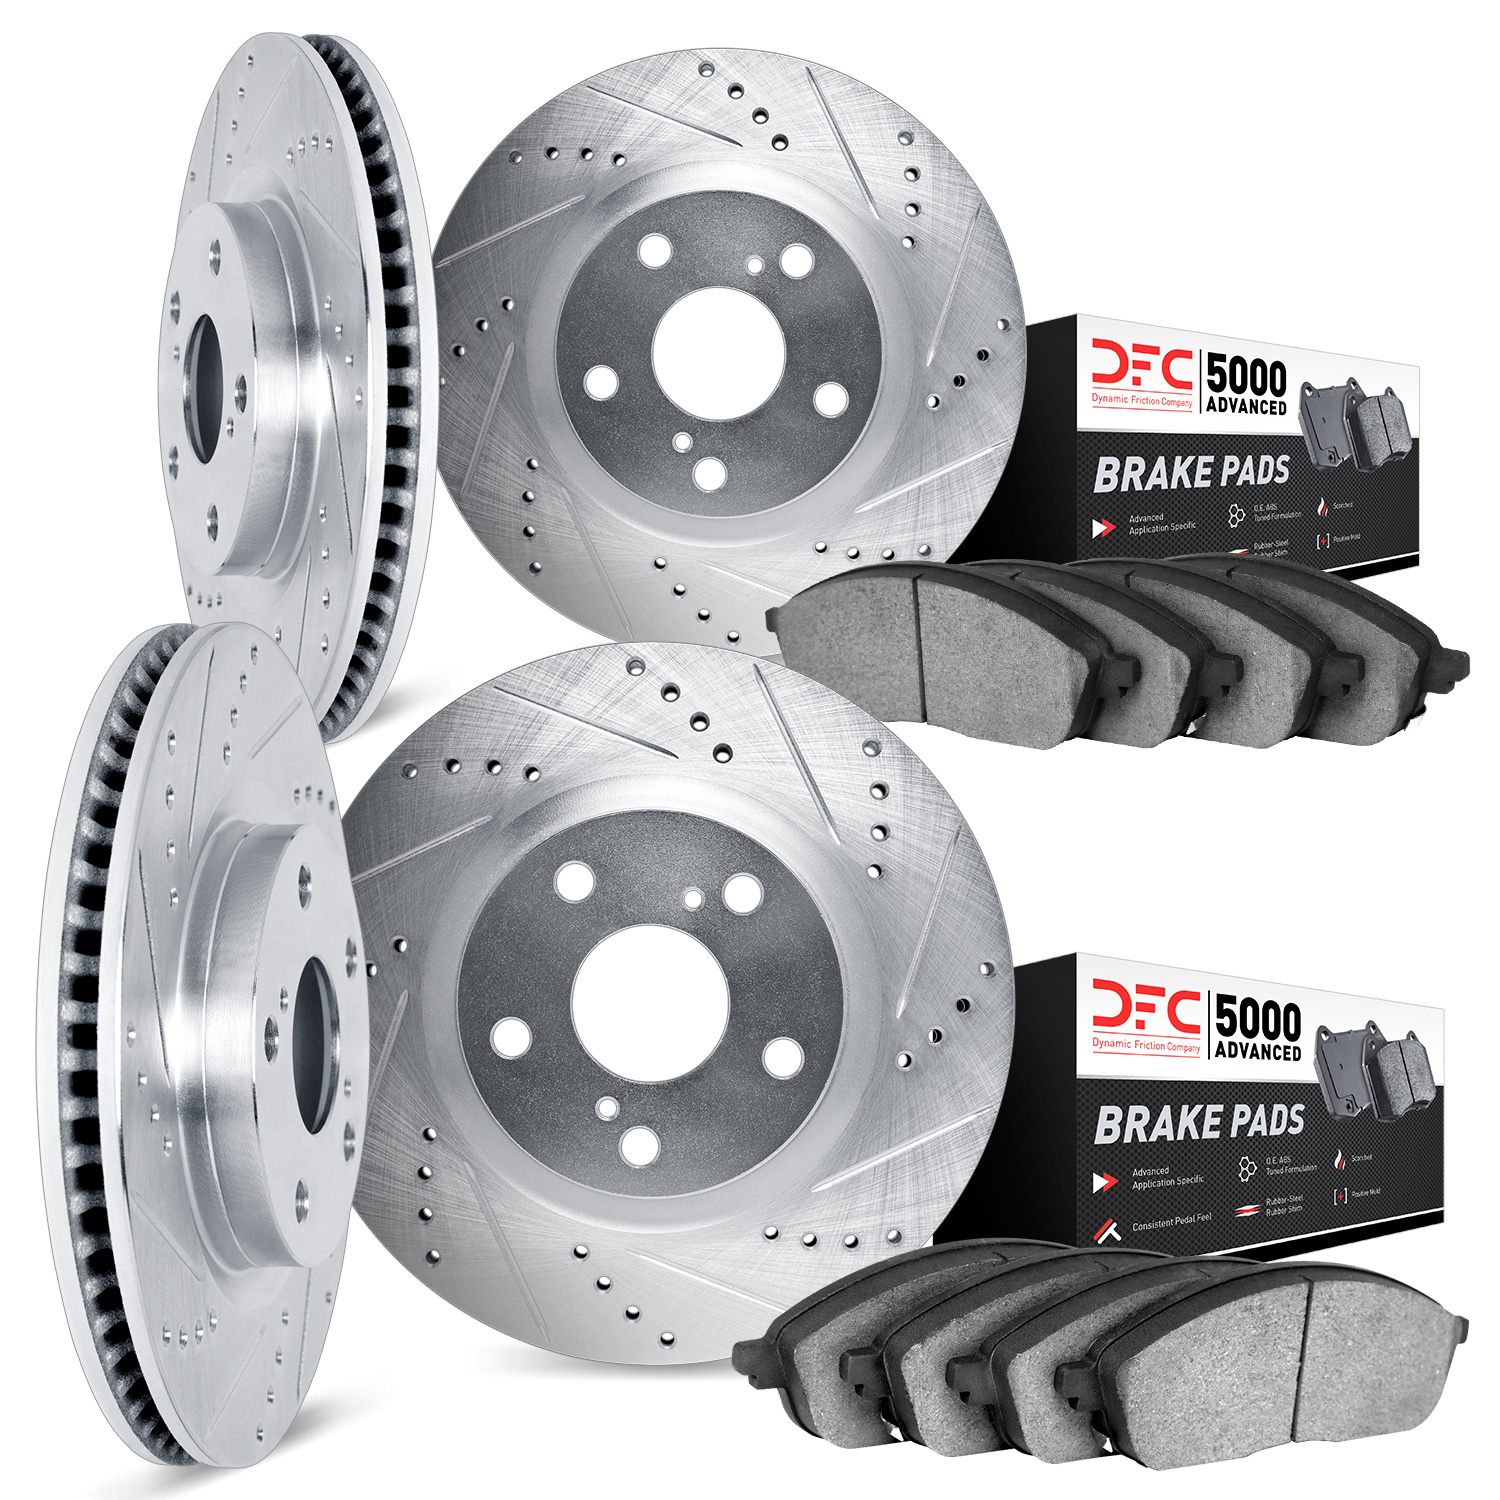 7504-75008 Drilled/Slotted Brake Rotors w/5000 Advanced Brake Pads Kit [Silver], Fits Select Lexus/Toyota/Scion, Position: Front